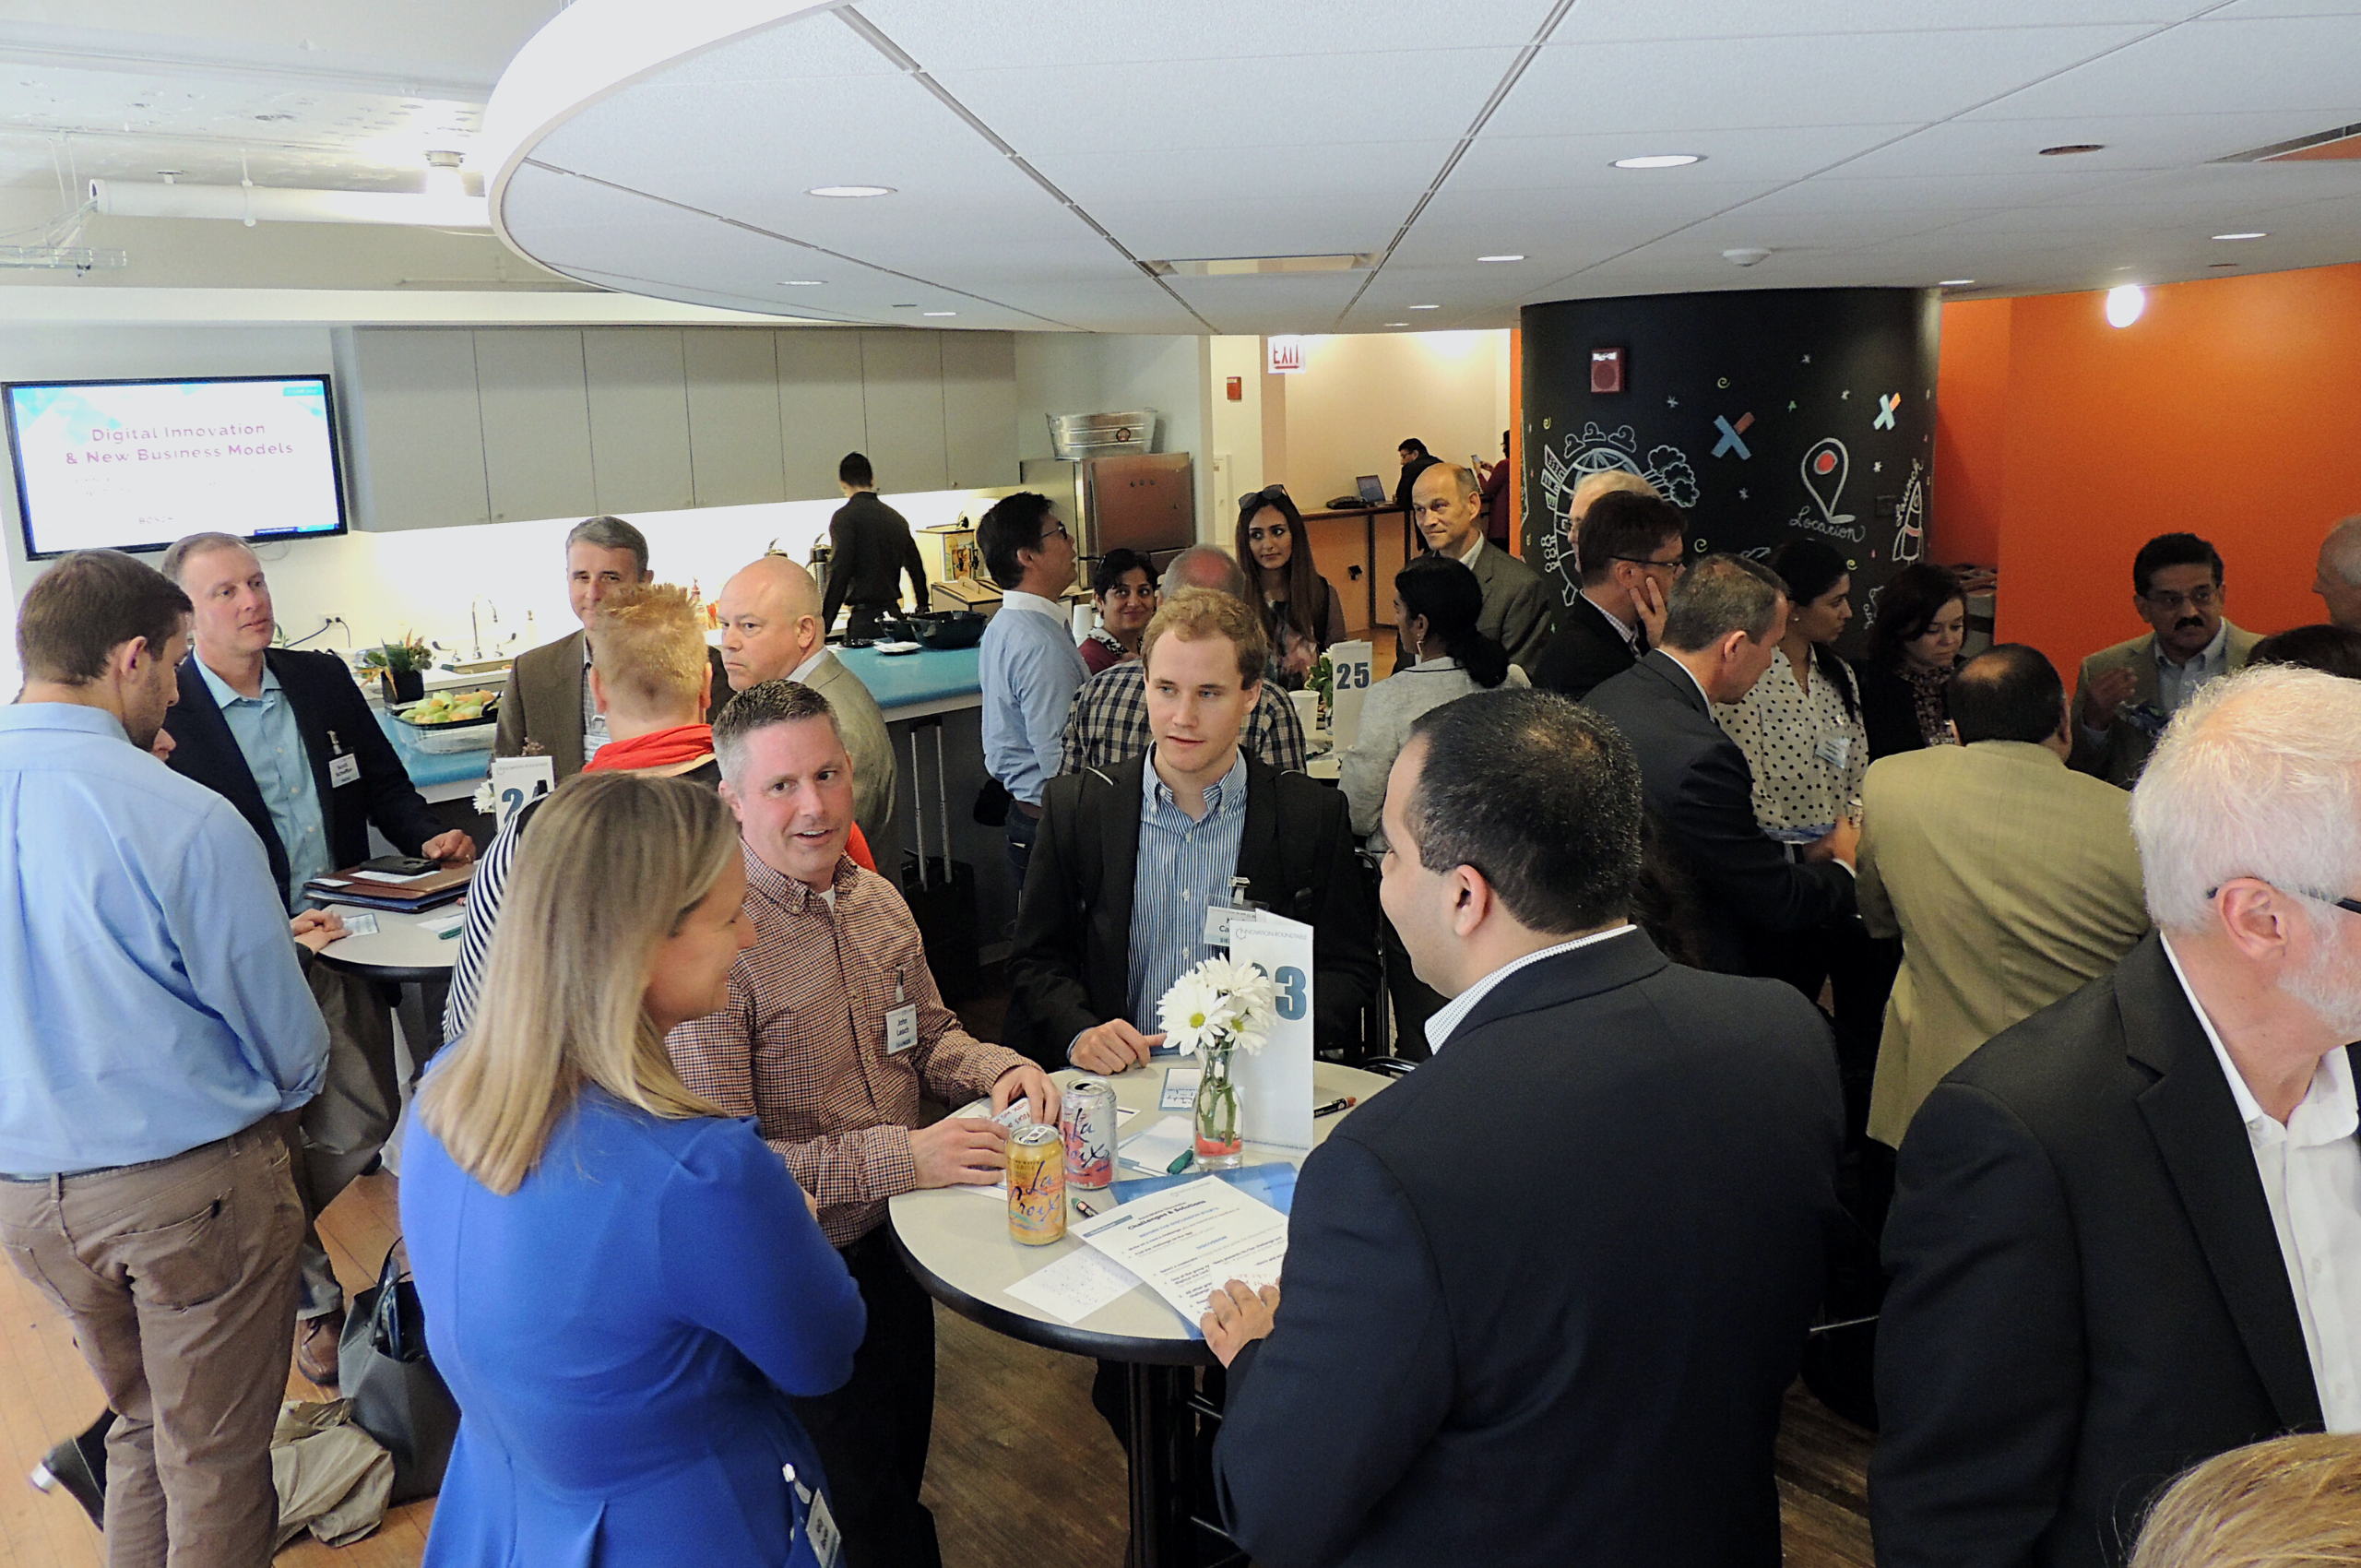 South Commmons - Networking and Breakout Areas